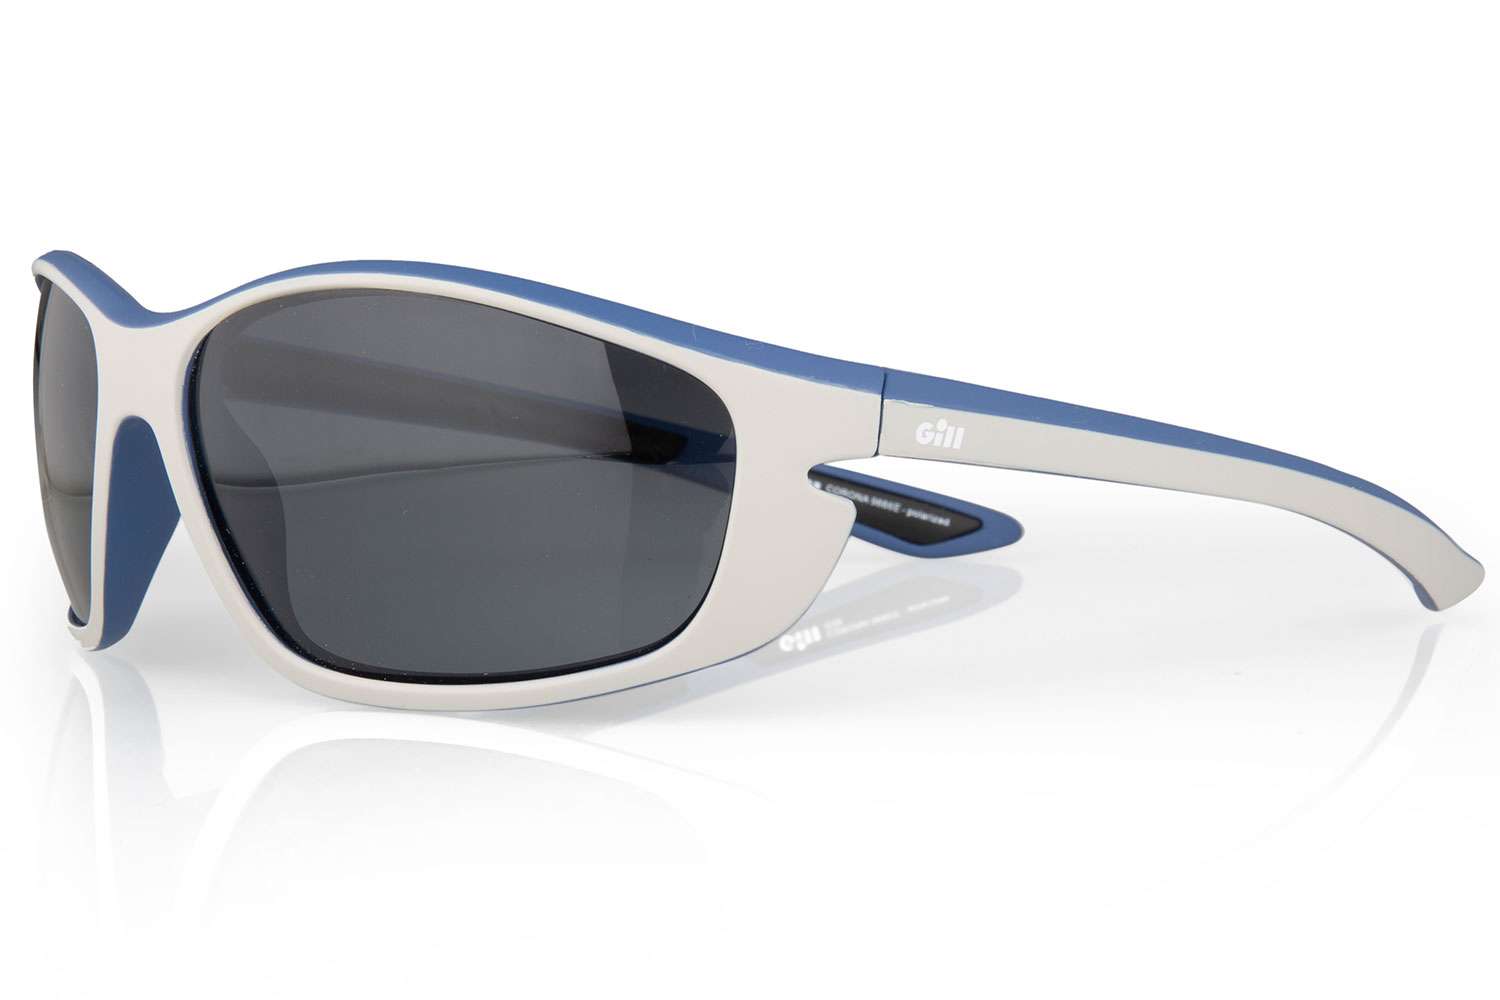  <B>Gill 9666 Corona Sunglasses</B>
<BR>Named for the sunny Riverside County town, the Corona Sunglasses are the glasses that the fisherman needs. Featuring saltwater-tested design, the Corona's are shaped to direct airflow around the eyes and face while cruising at speed on the water. The cut outs on either side of the temples direct airflow around (and through) the frames themselves. The Corona's also feature polarized and hydrophobic lenses so water spray is no longer an issue and since they're designed for the water, they float. 
<BR>
<B>MSRP: $89.95 </B>
<BR>
<a href=